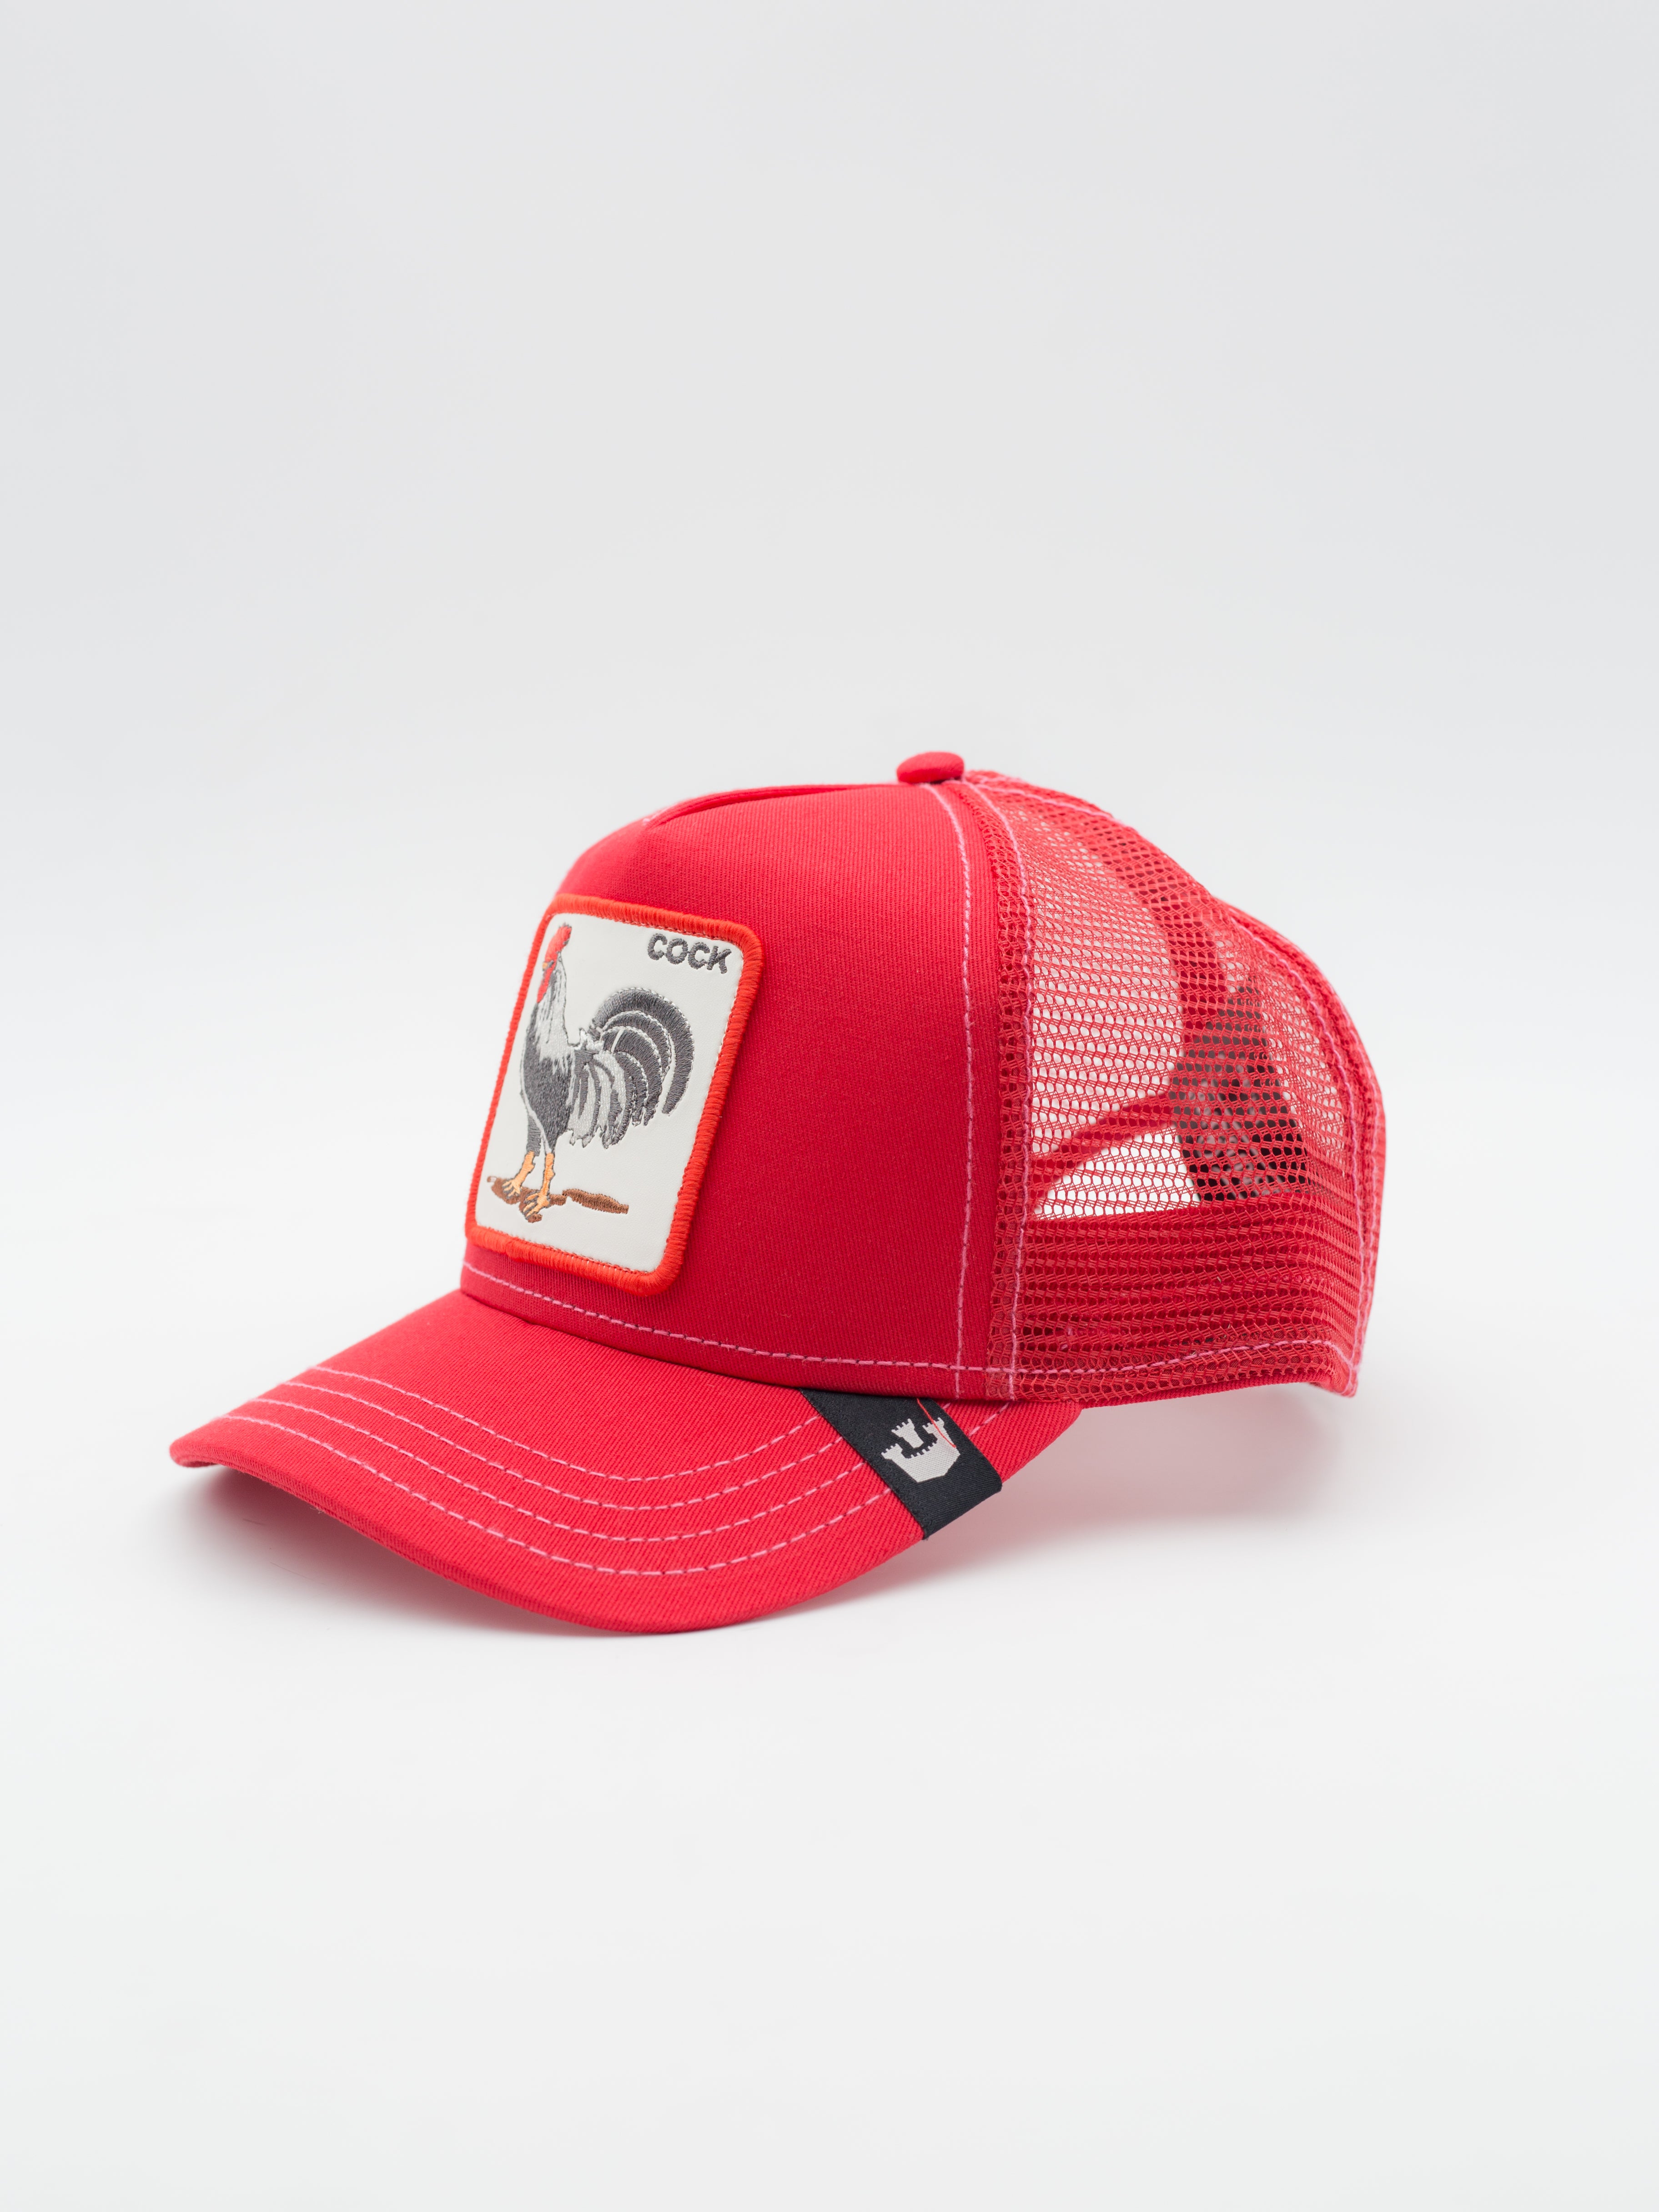 The Cock Trucker Red